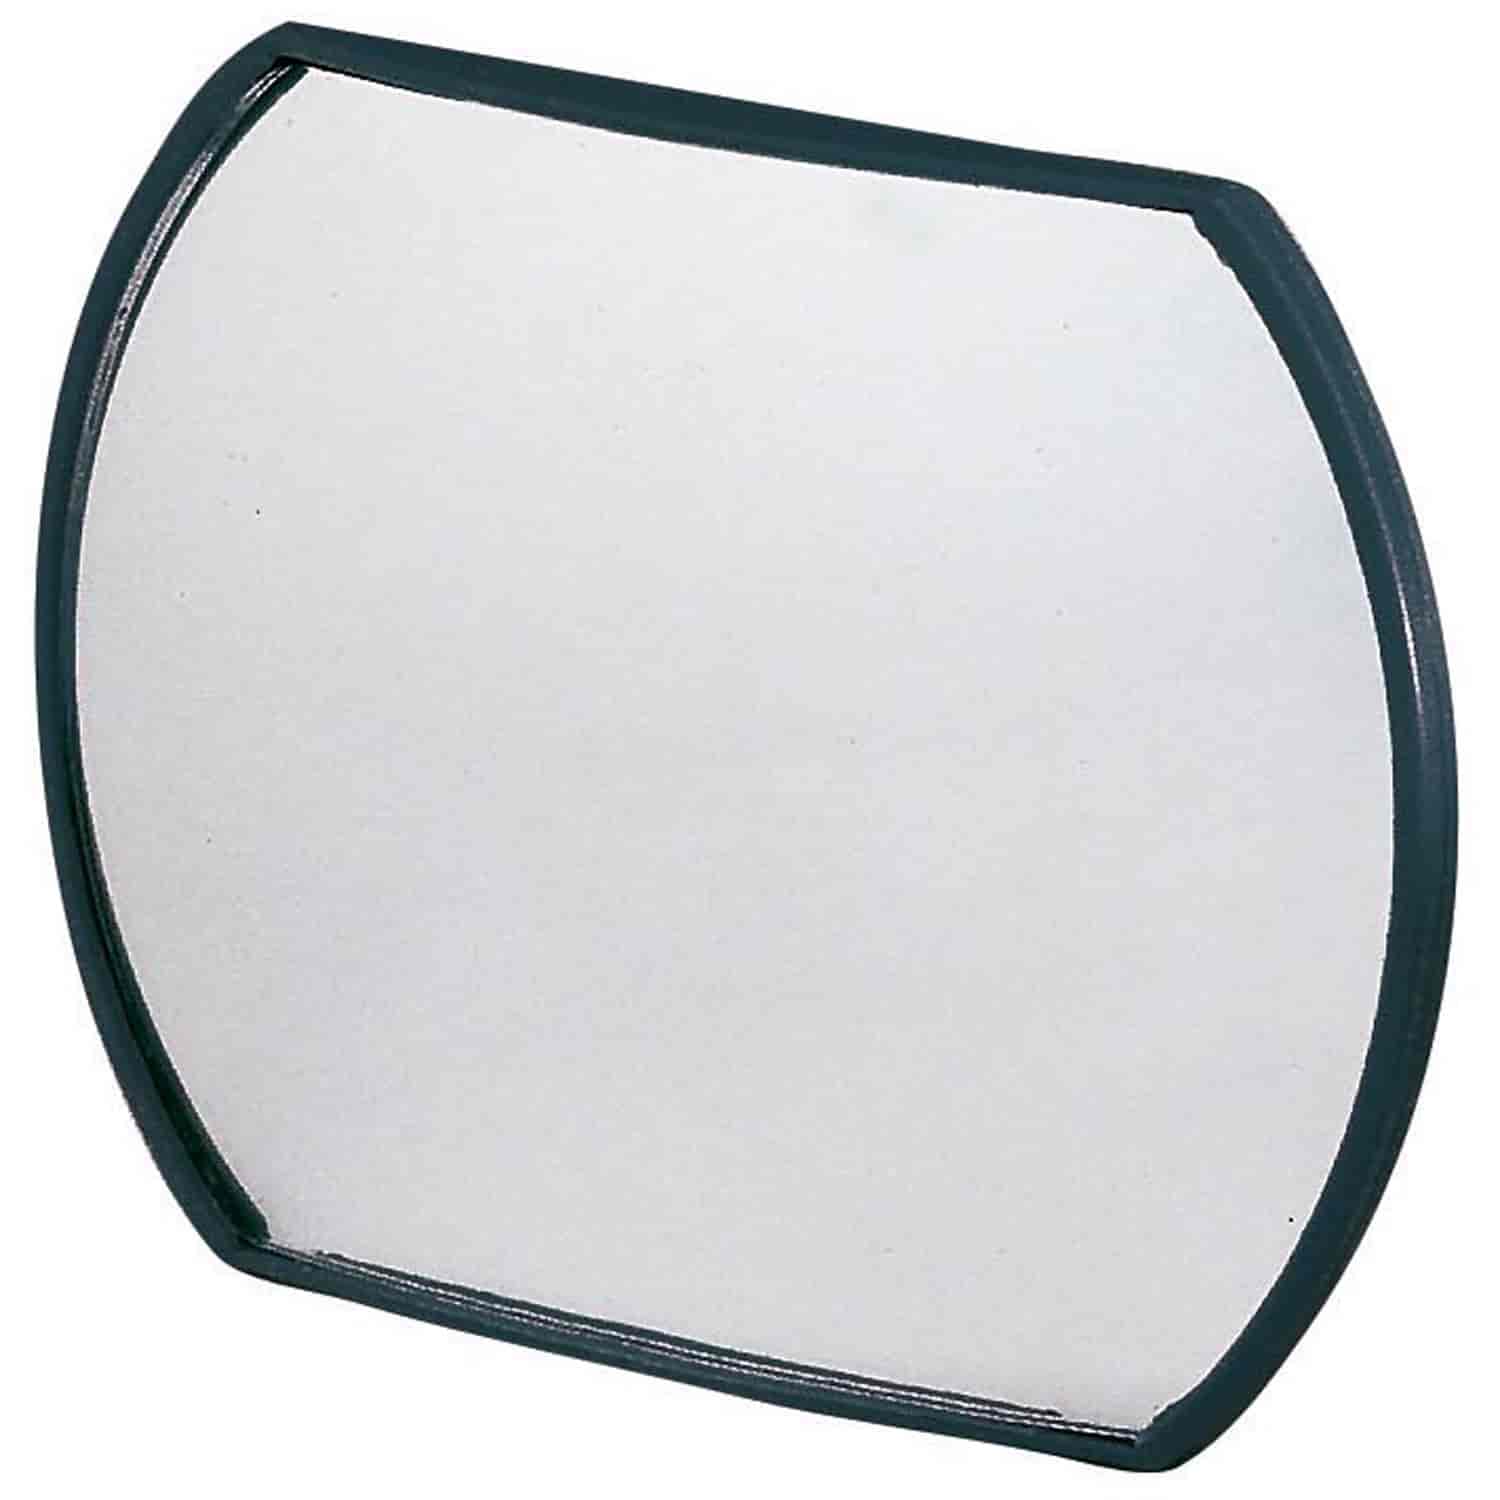 Stick-On Oval Mirror This mirror is 5-1/2 inches